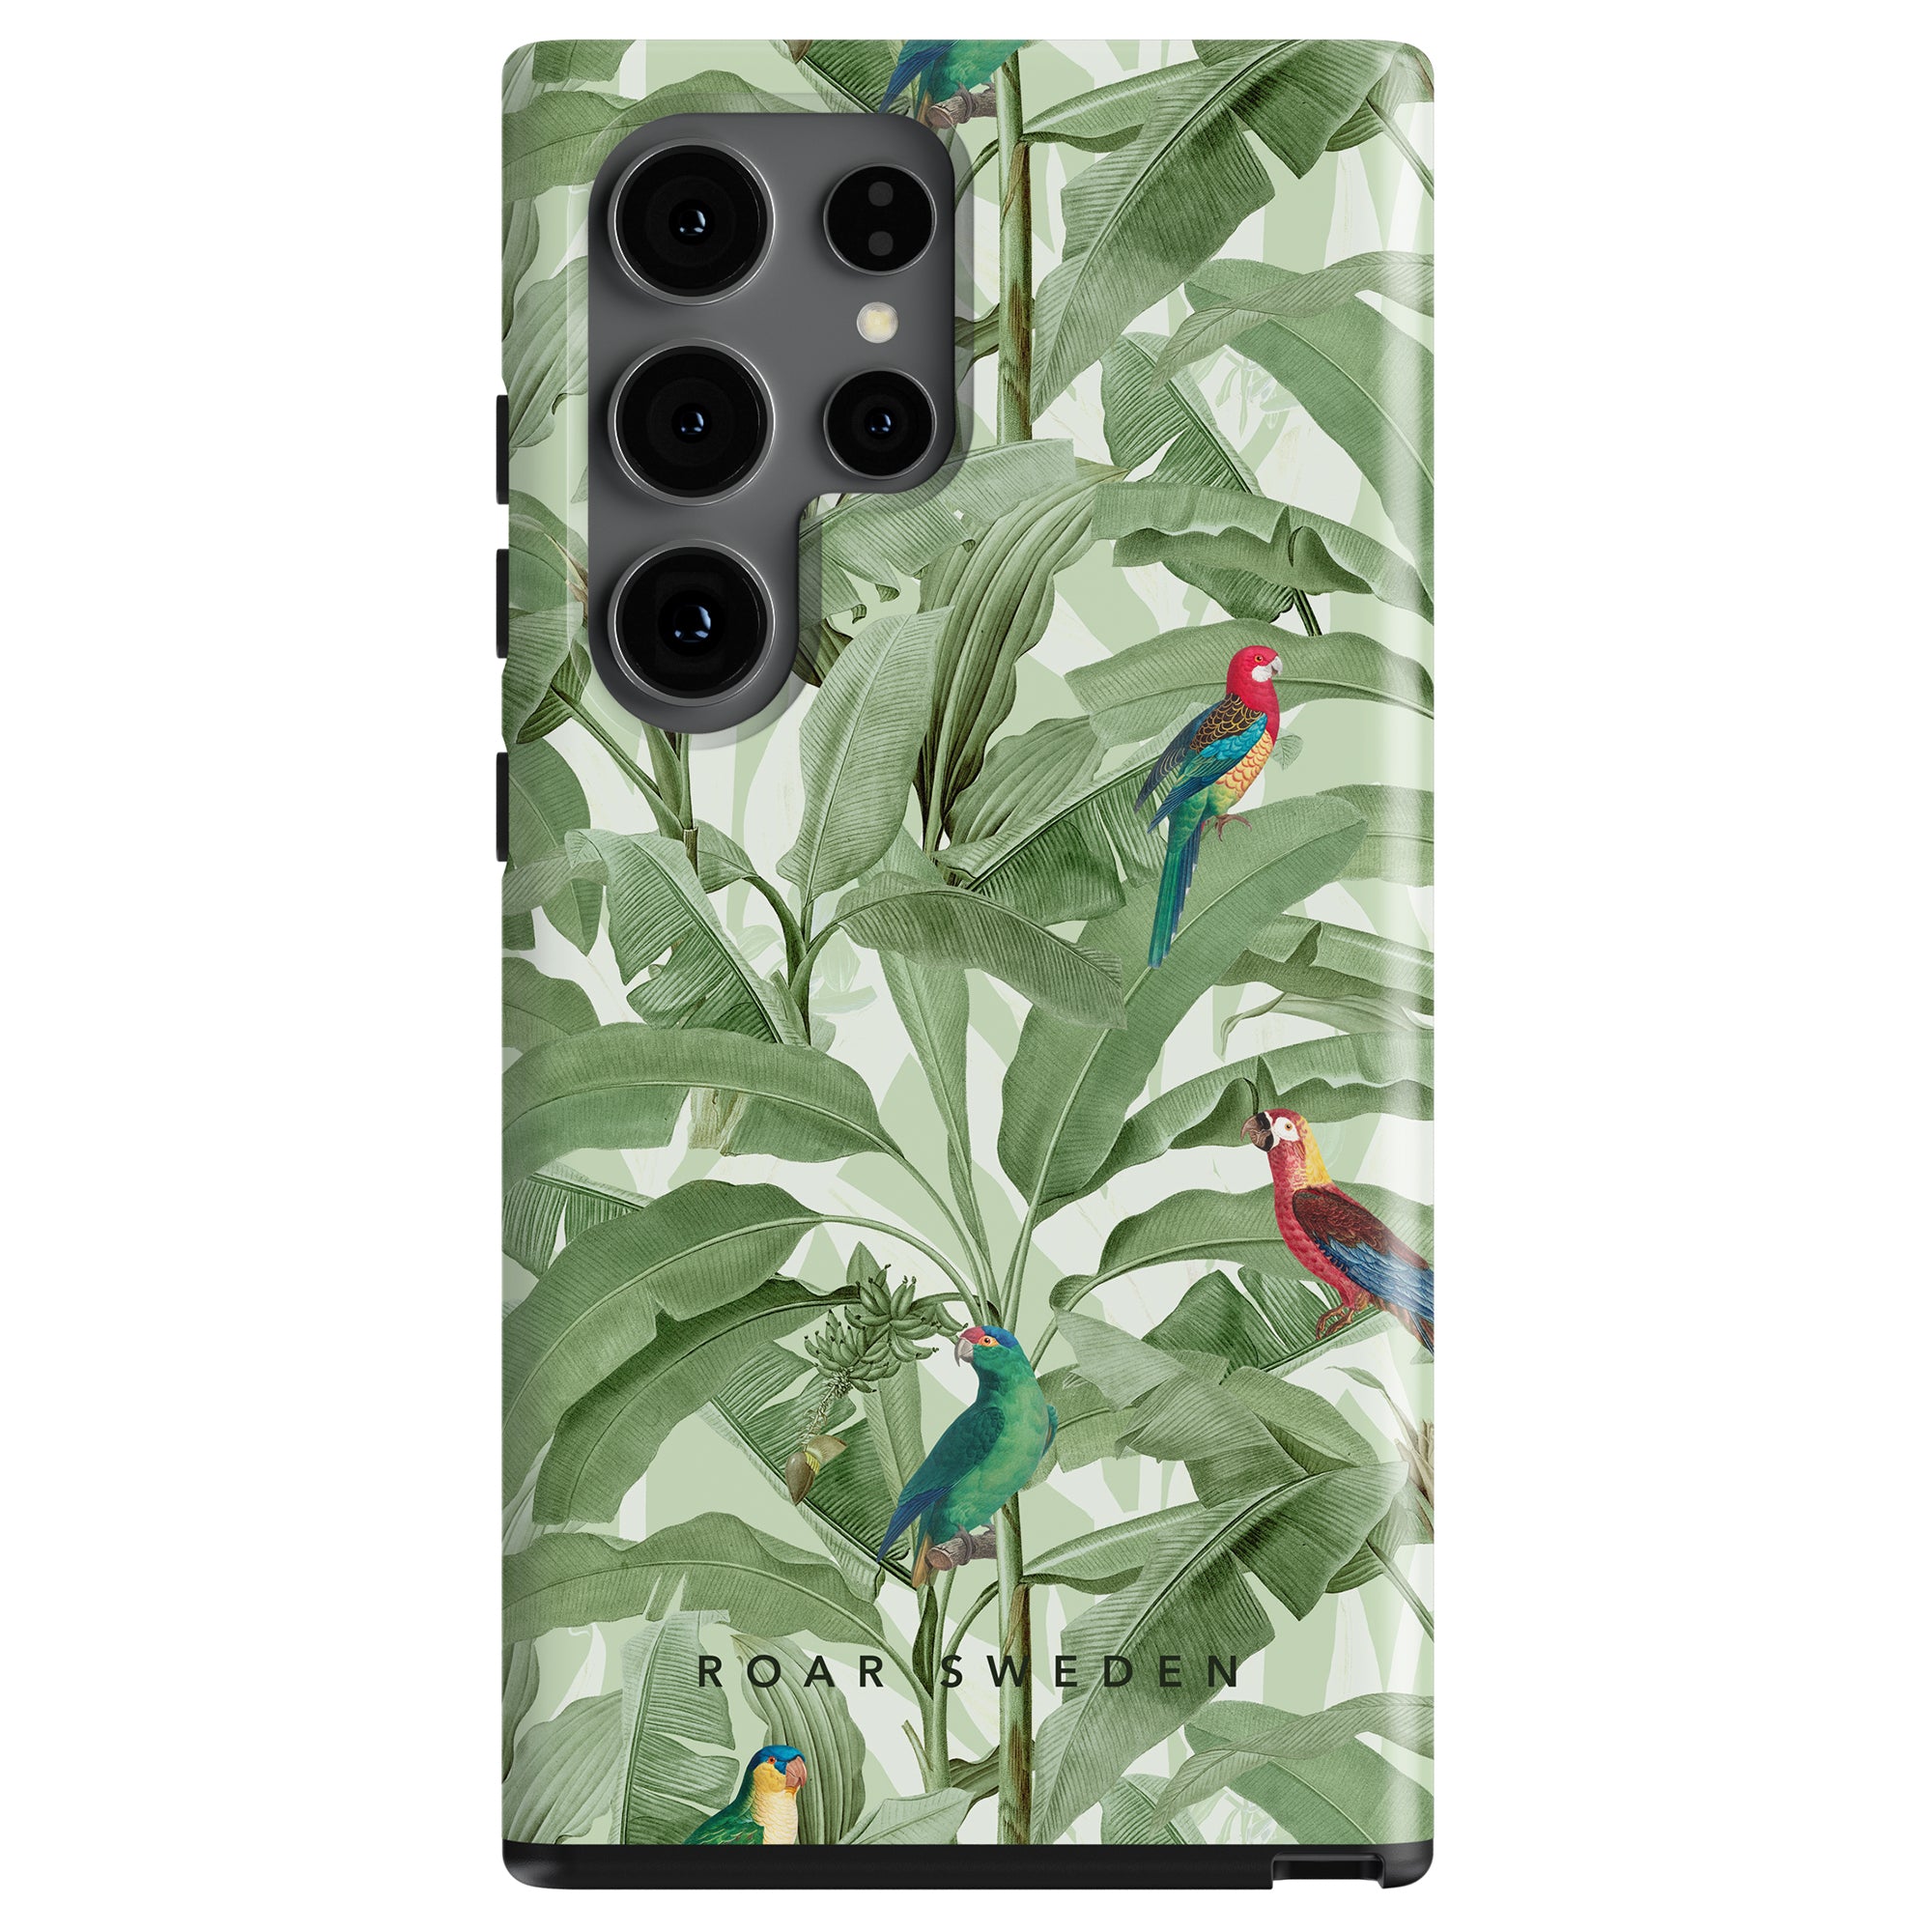 A smartphone with a Parrot Paradise - Tough Case featuring a camera module at the top.